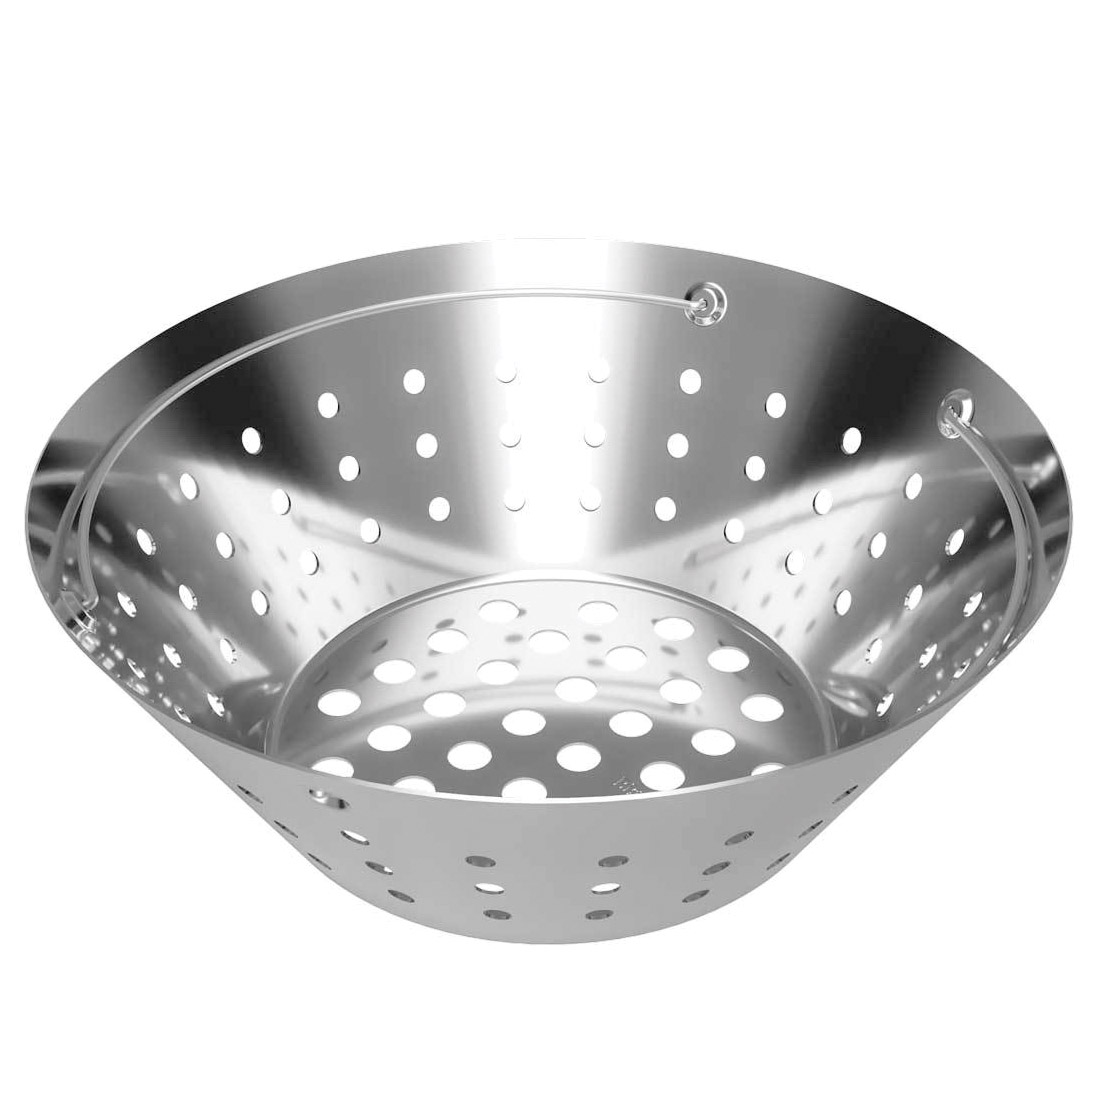 Big Green Egg 122681 Fire Bowl, Stainless Steel, For: XL Egg - 4